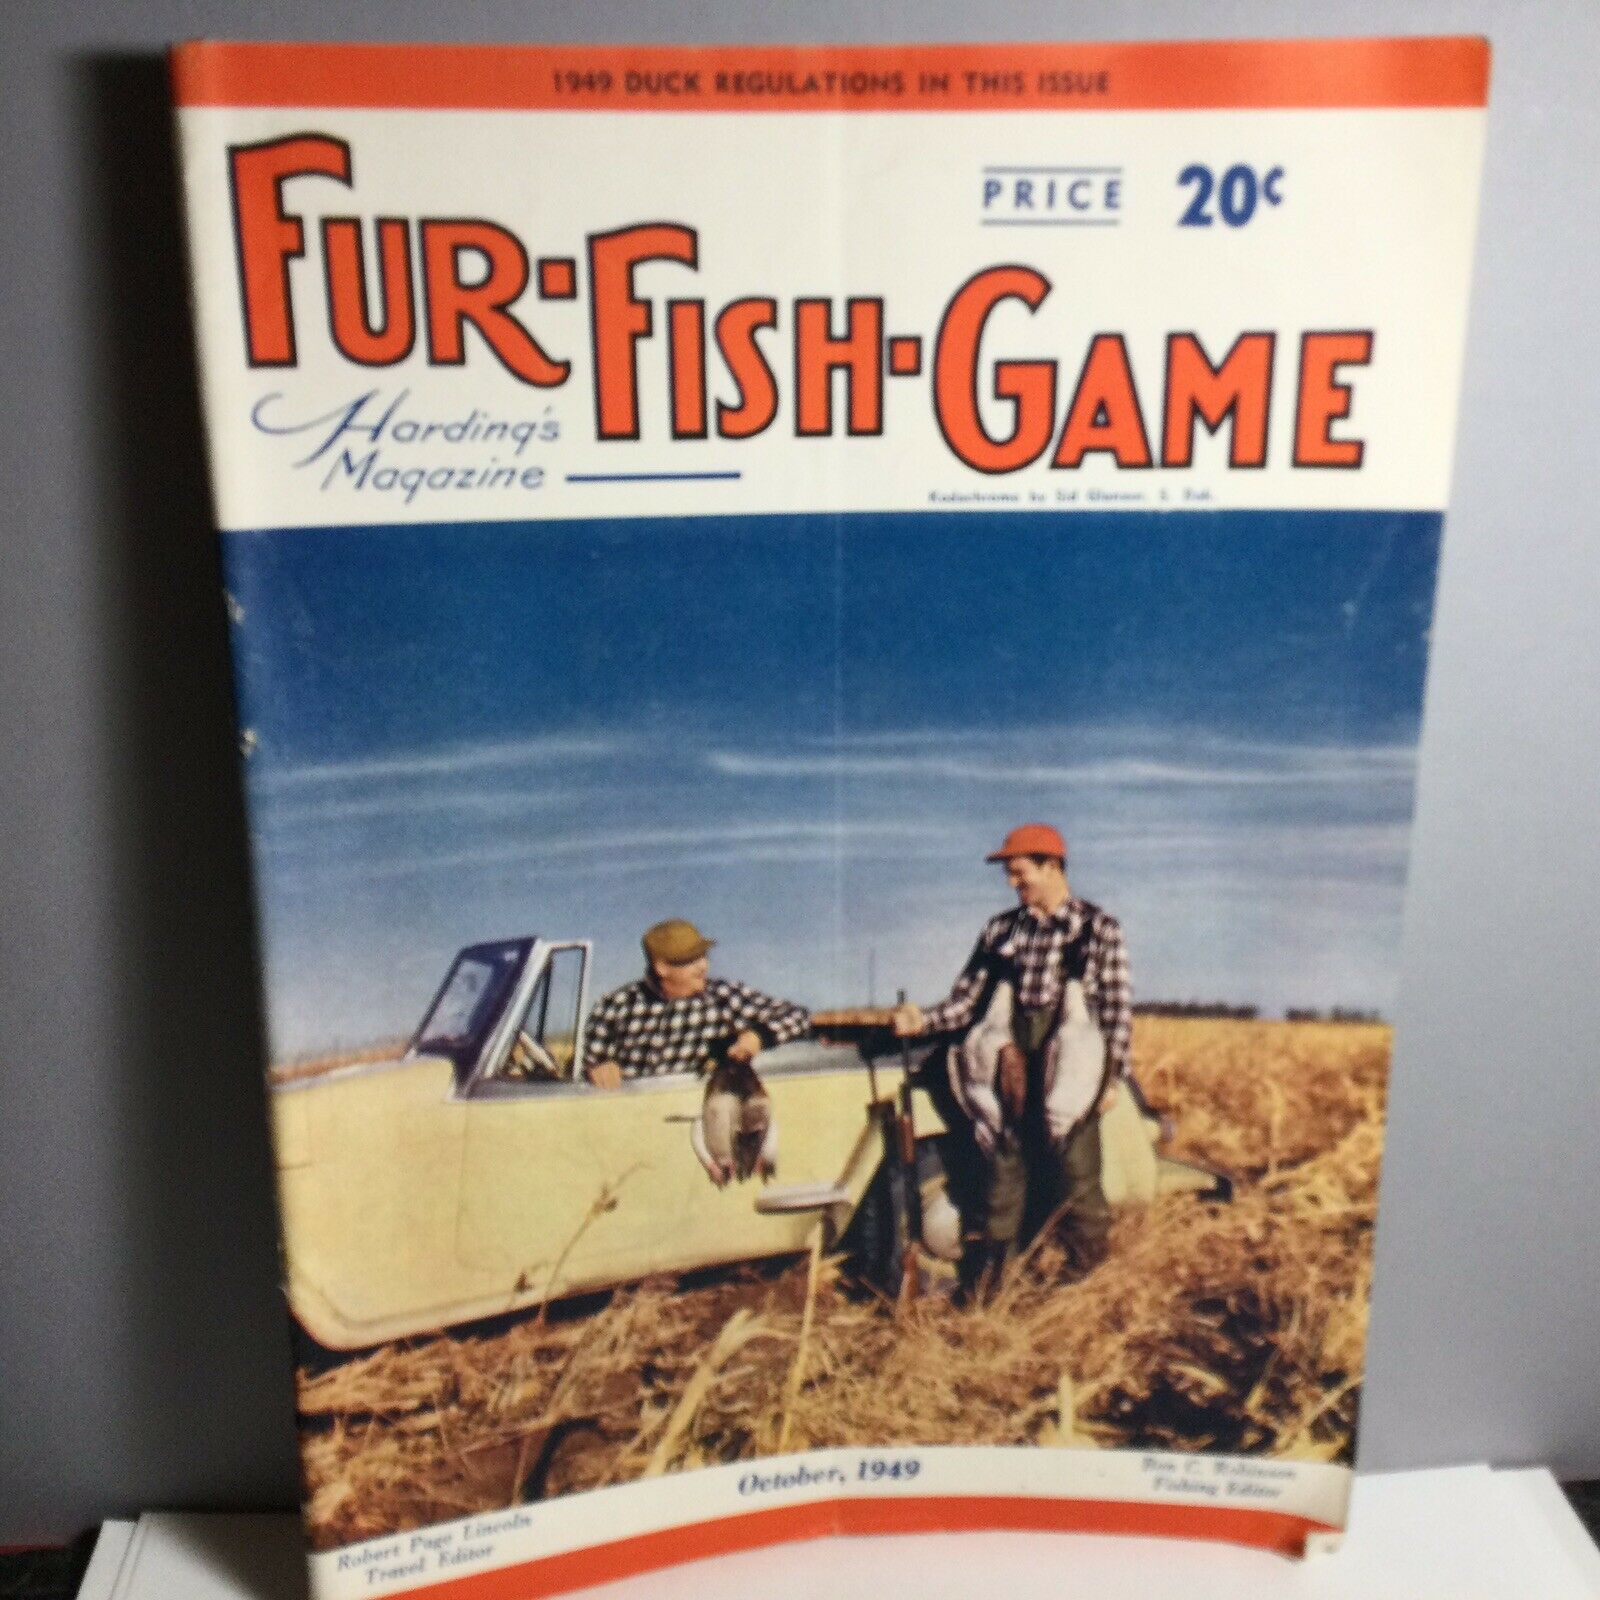 Oct 1949 Fur-fish-game Harding’s Magazine Kodachrome Cover By Sid Glanzer